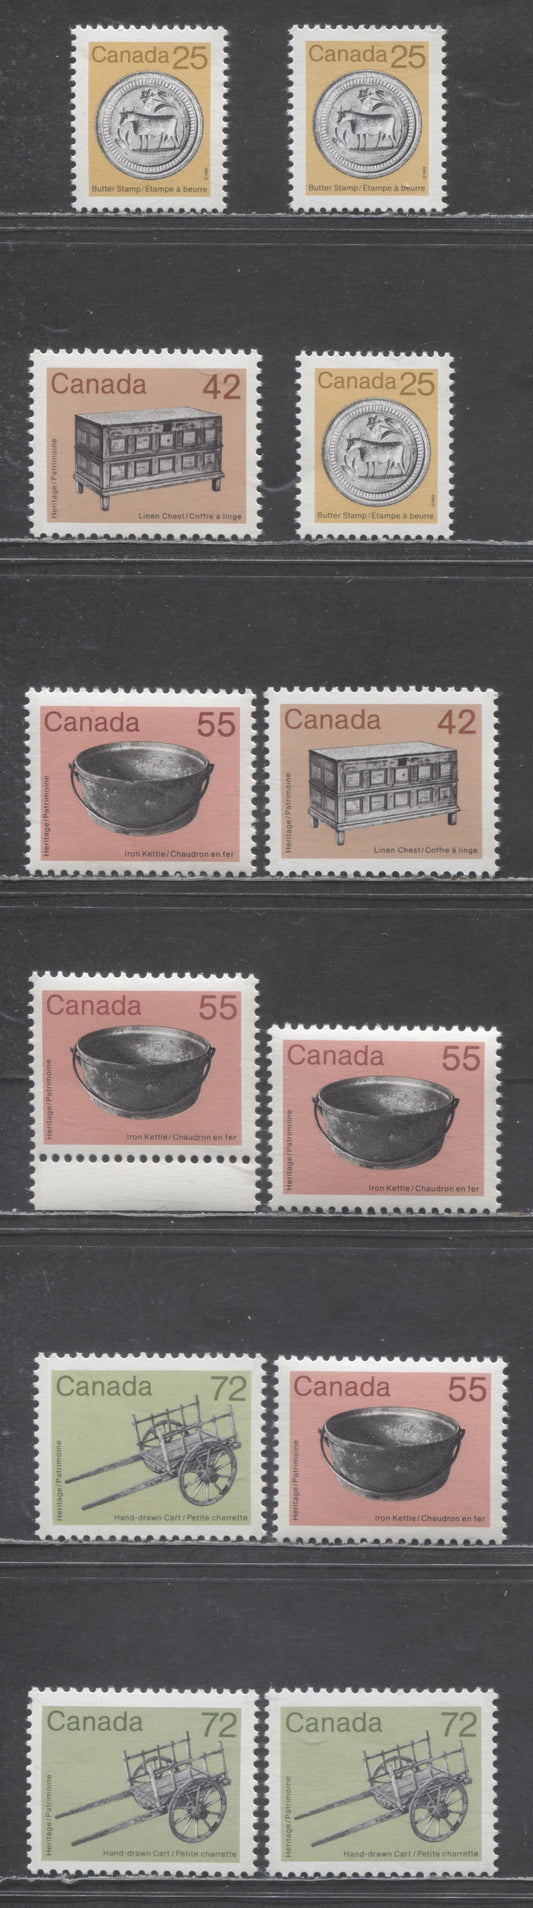 Lot 344 Canada #1080, 1081i,iii, 1082, 1083-iii 25c-72c Yellow/Apple Green & Multicolored Butter Stamp - Hand-Drawn Cart Issues, 1987-1988 Artifact Definitives, 12 VFNH Singles With Various Harrison & Rolland Papers, With Shade Varieties